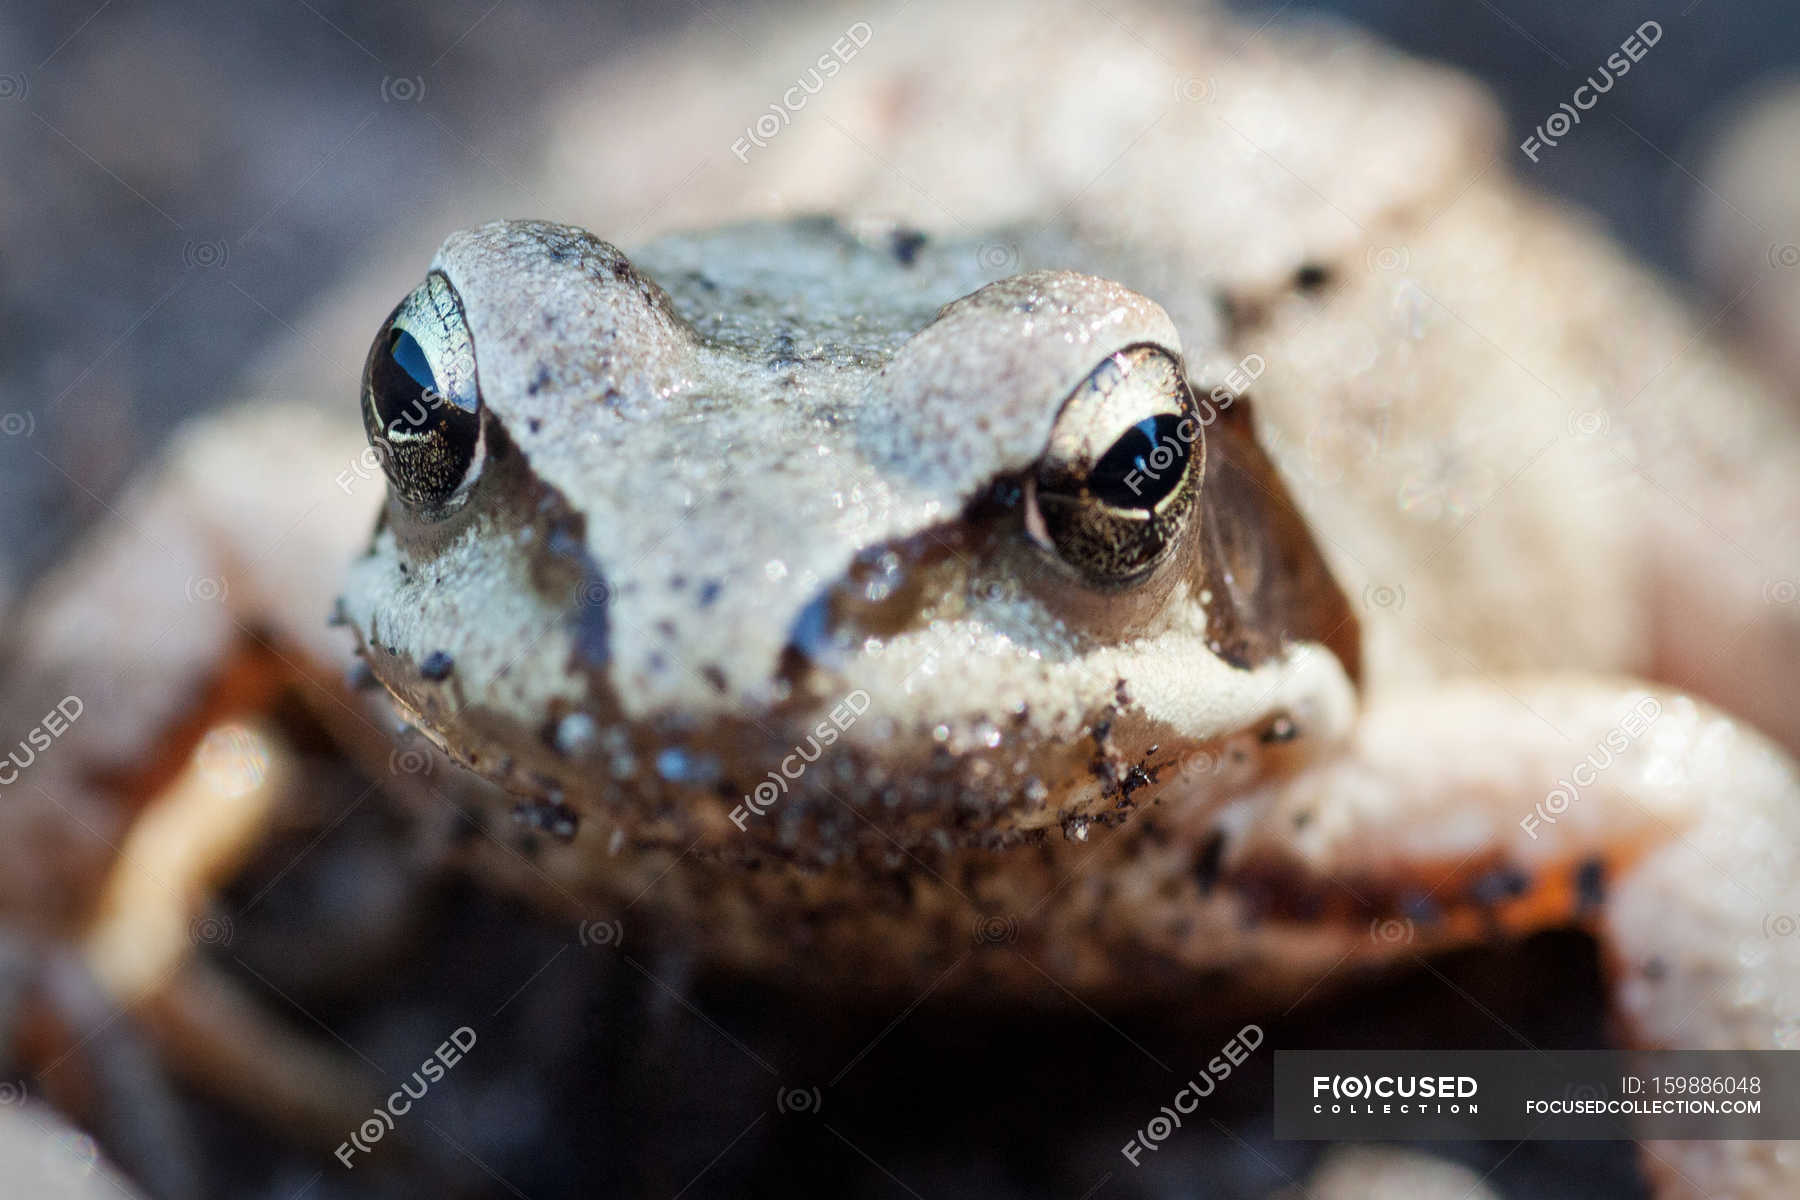 Frog in wild nature — Stock Photo | #159886048